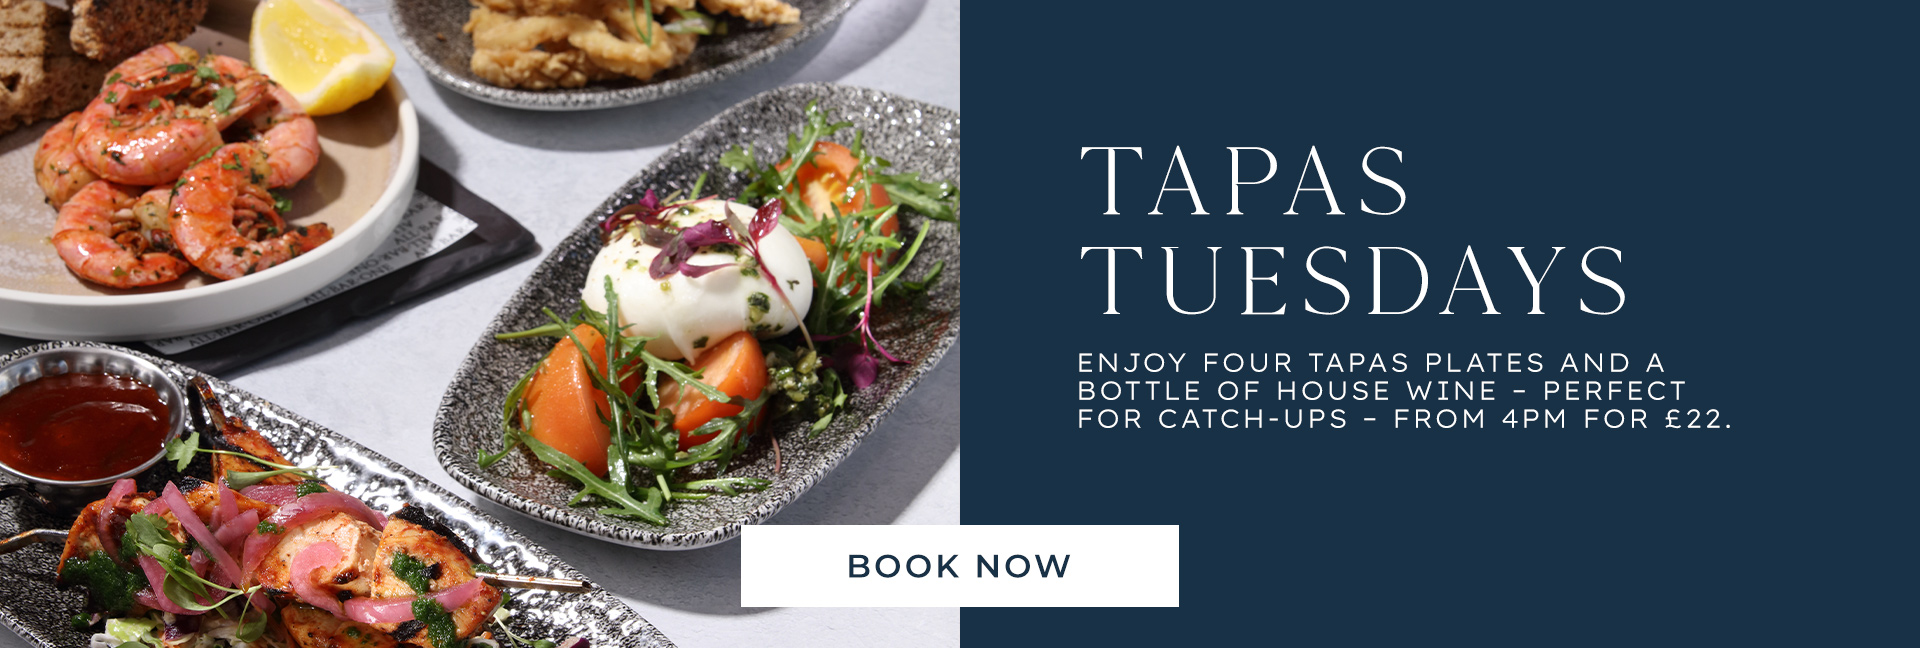 Tapas Tuesday at All Bar One New Street Station - Book now